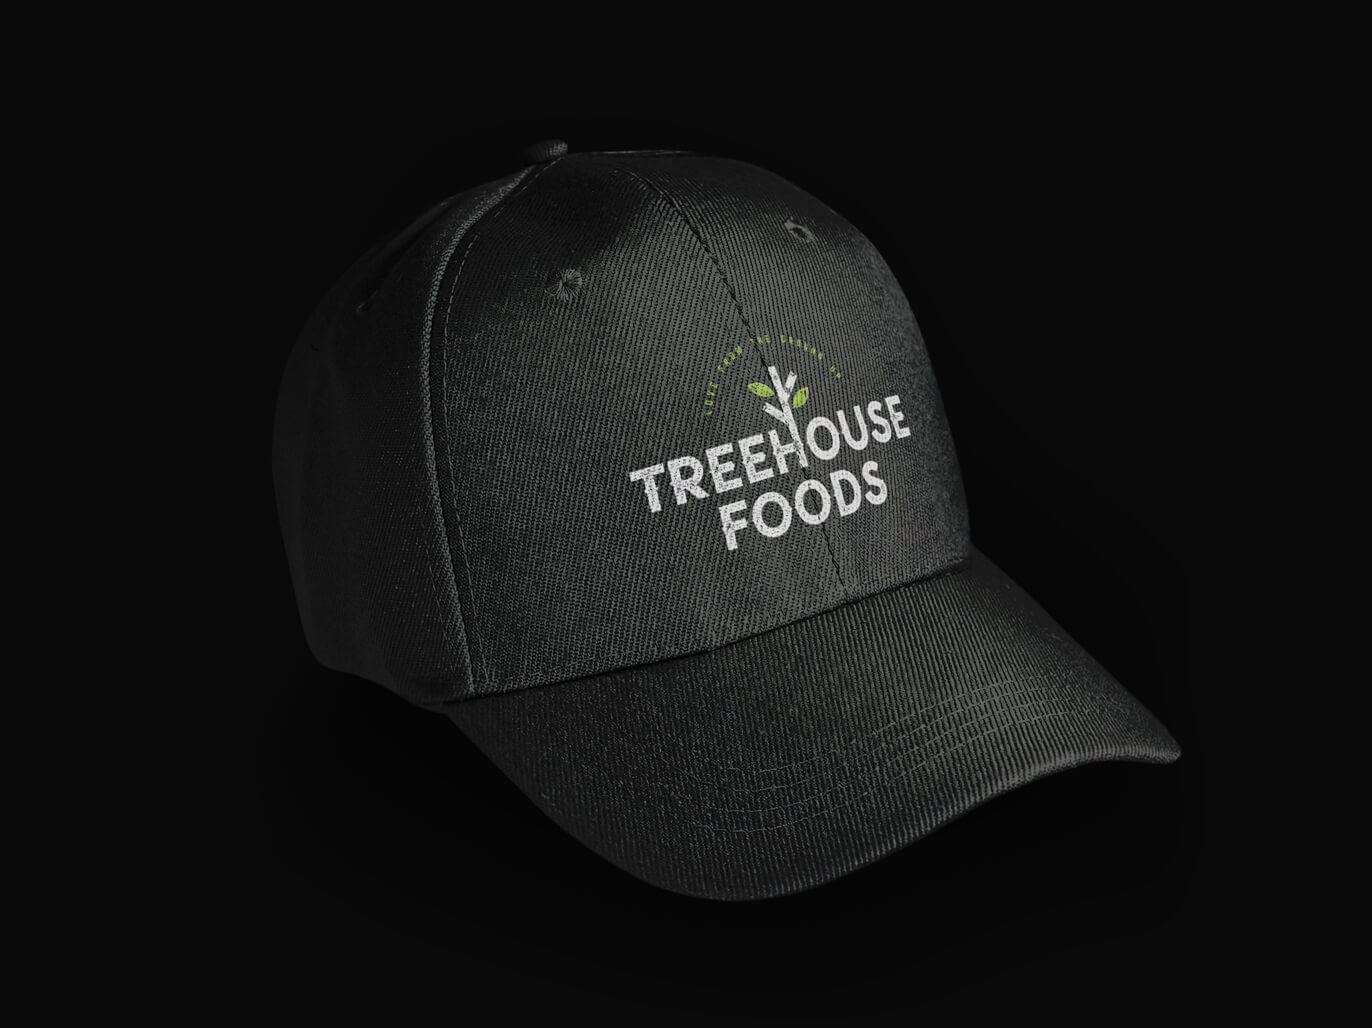 treehouse-foods-branded-cap